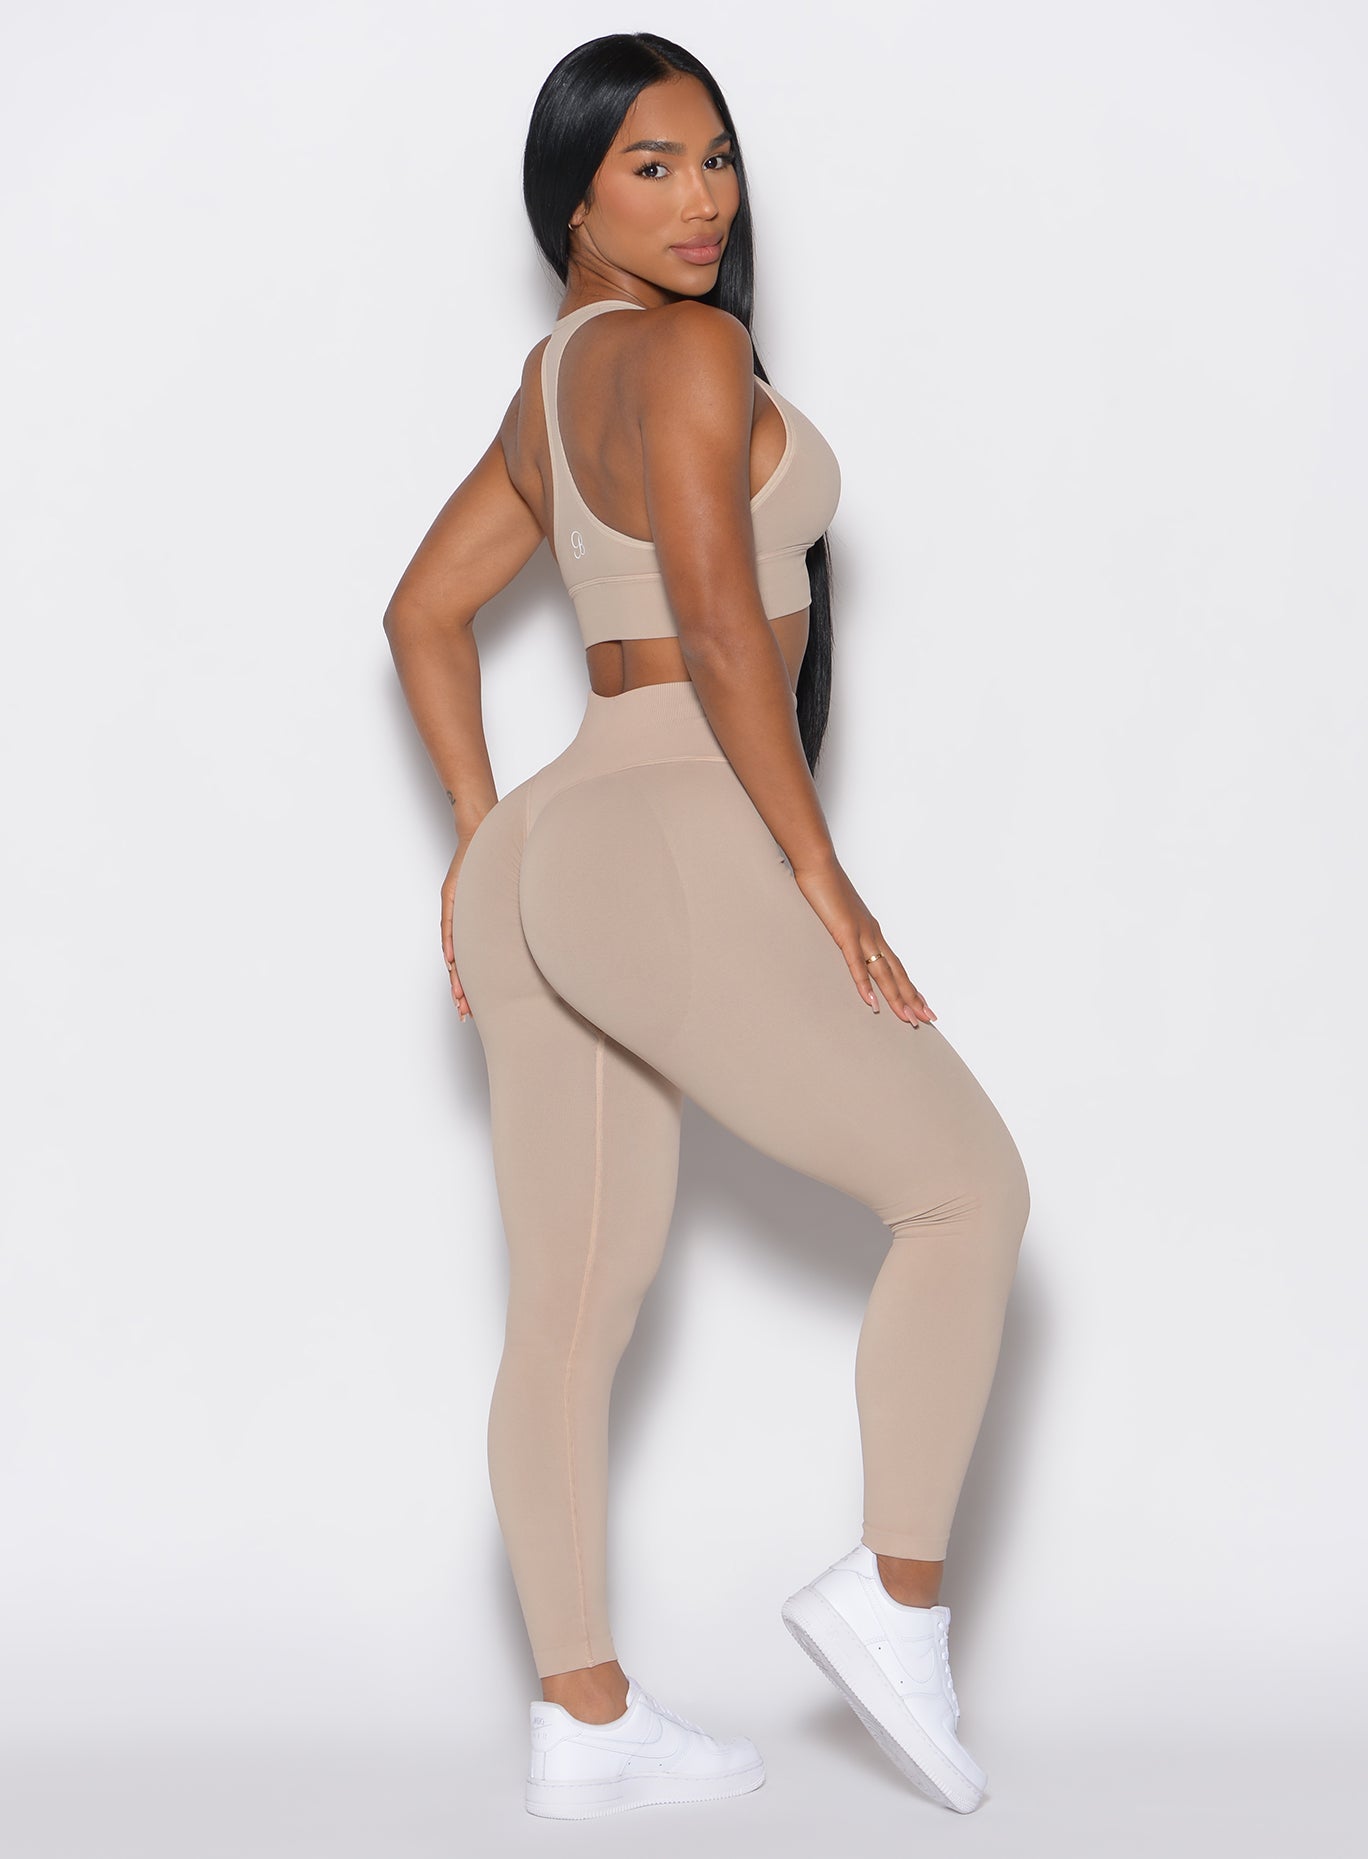 right side profile view of a model facing to her right wearing our cheeky seamless leggings in Timeless Taupe color along with the matching sports bra